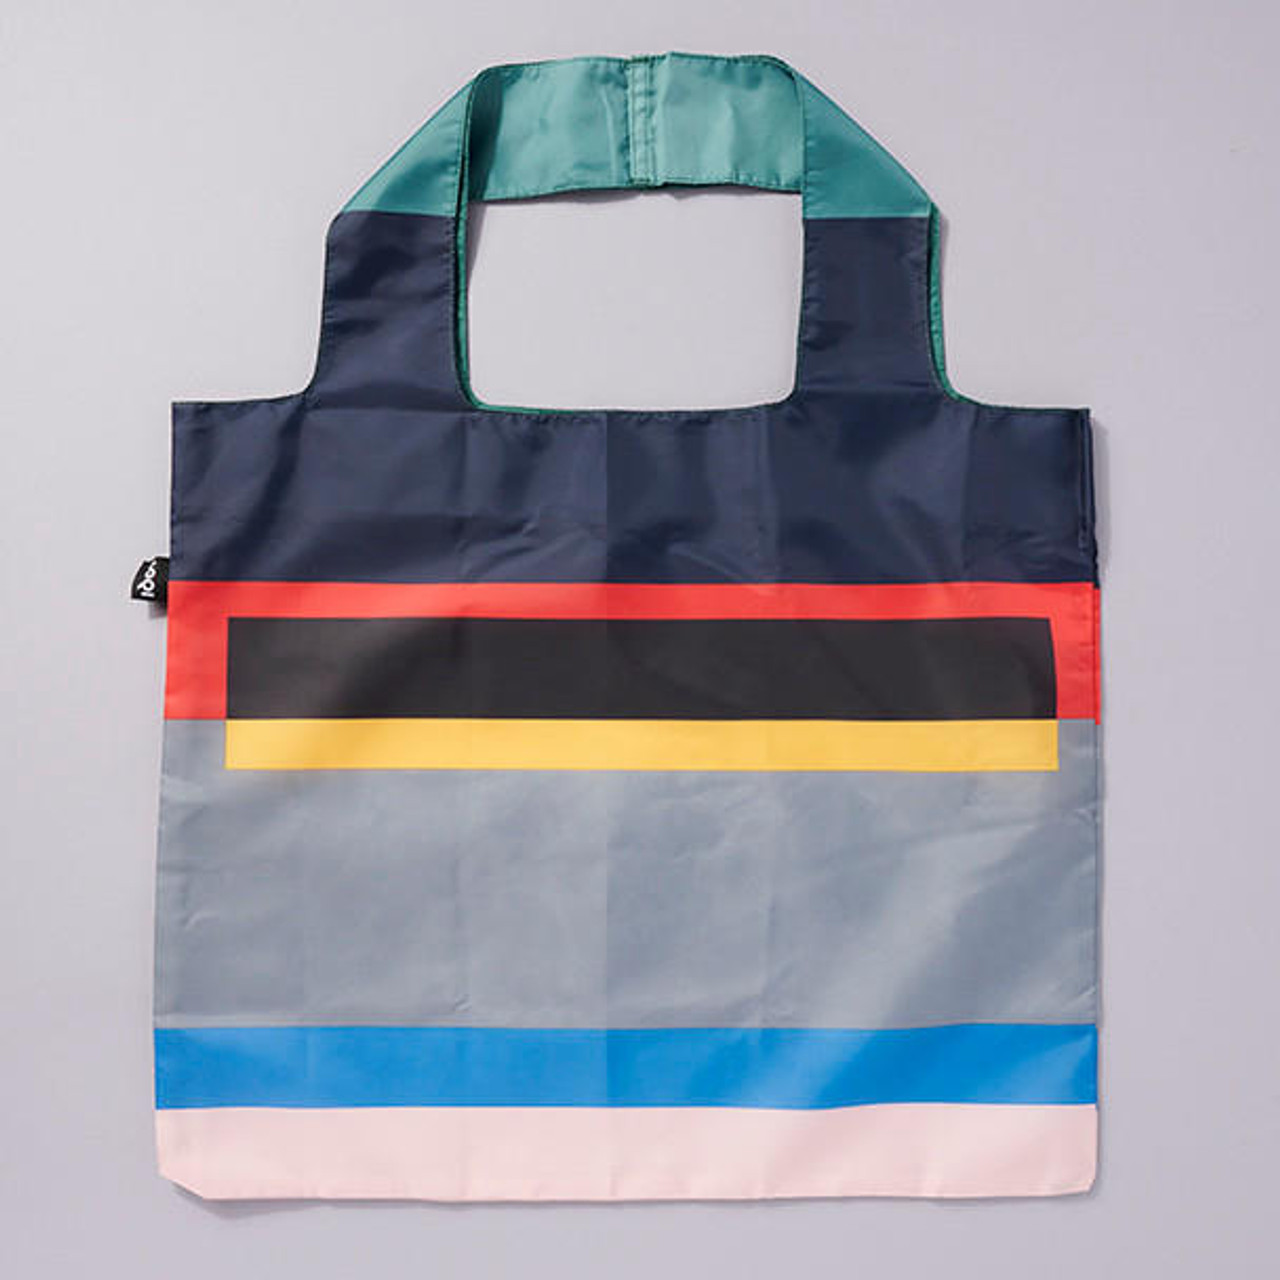 Super Replica Book Tote? It Takes Less Than One Second to Tell — MUTT  FLAPPER